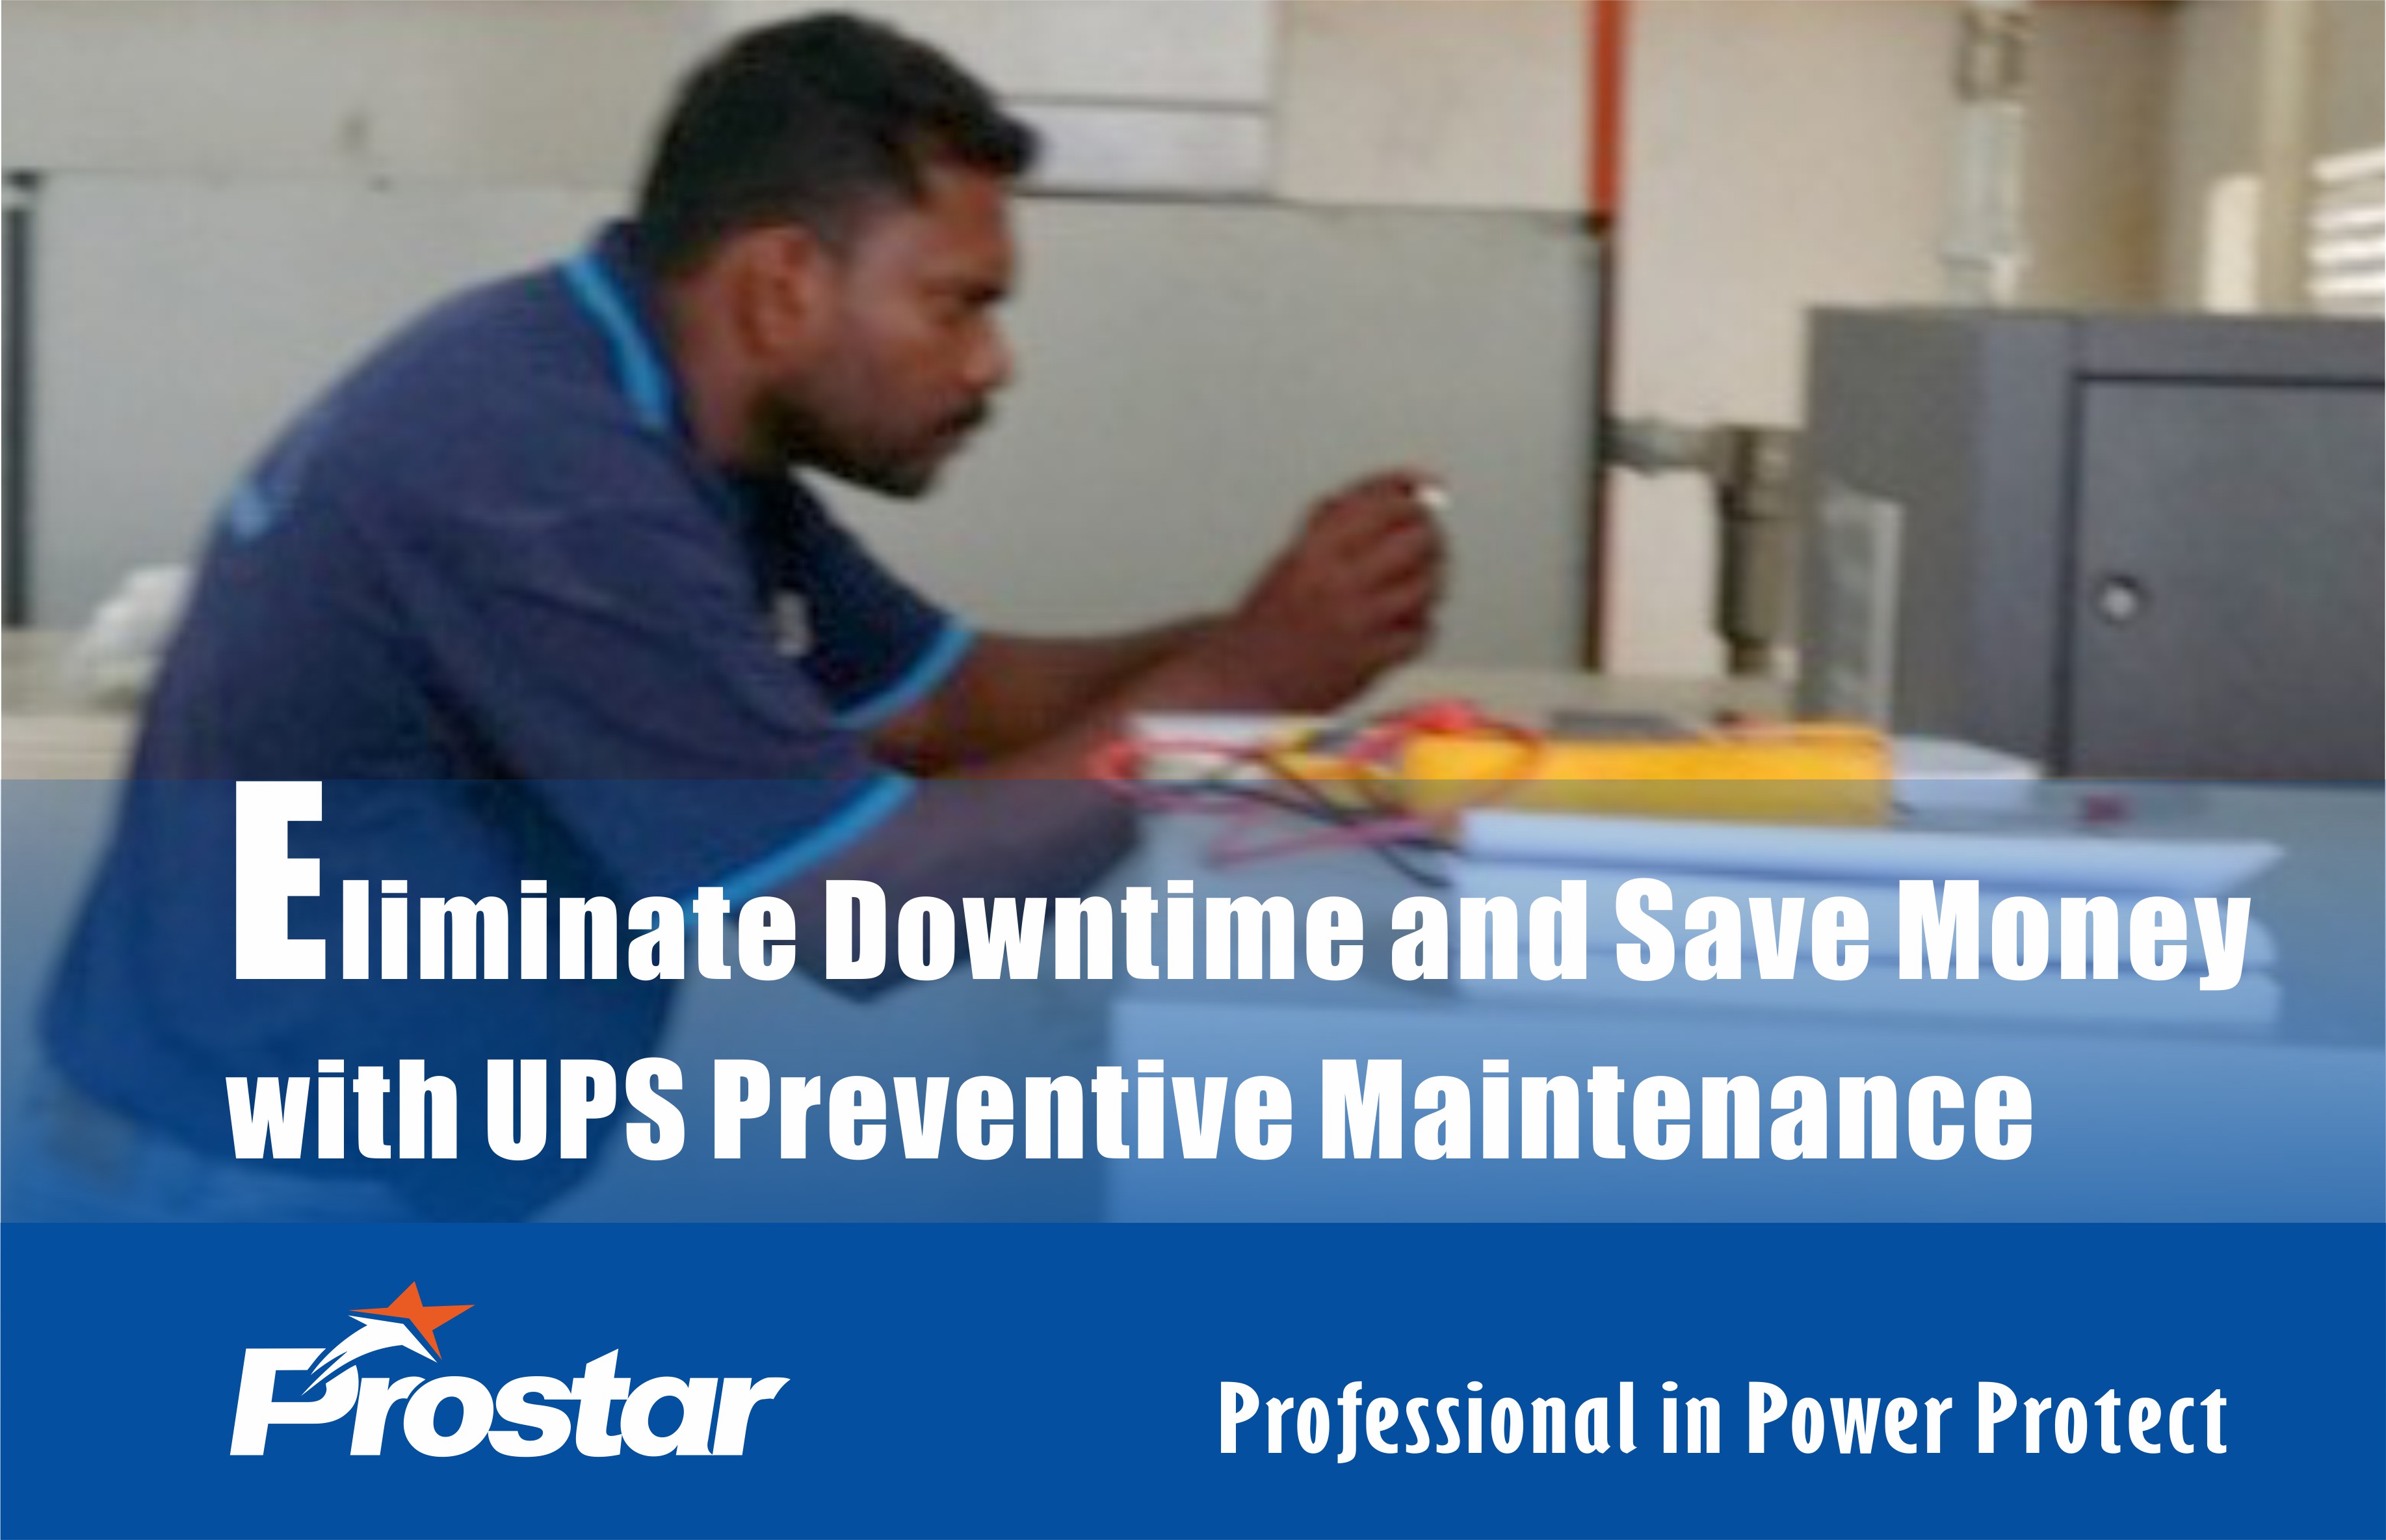 Eliminate Downtime and Save Money with UPS Preventive Maintenance